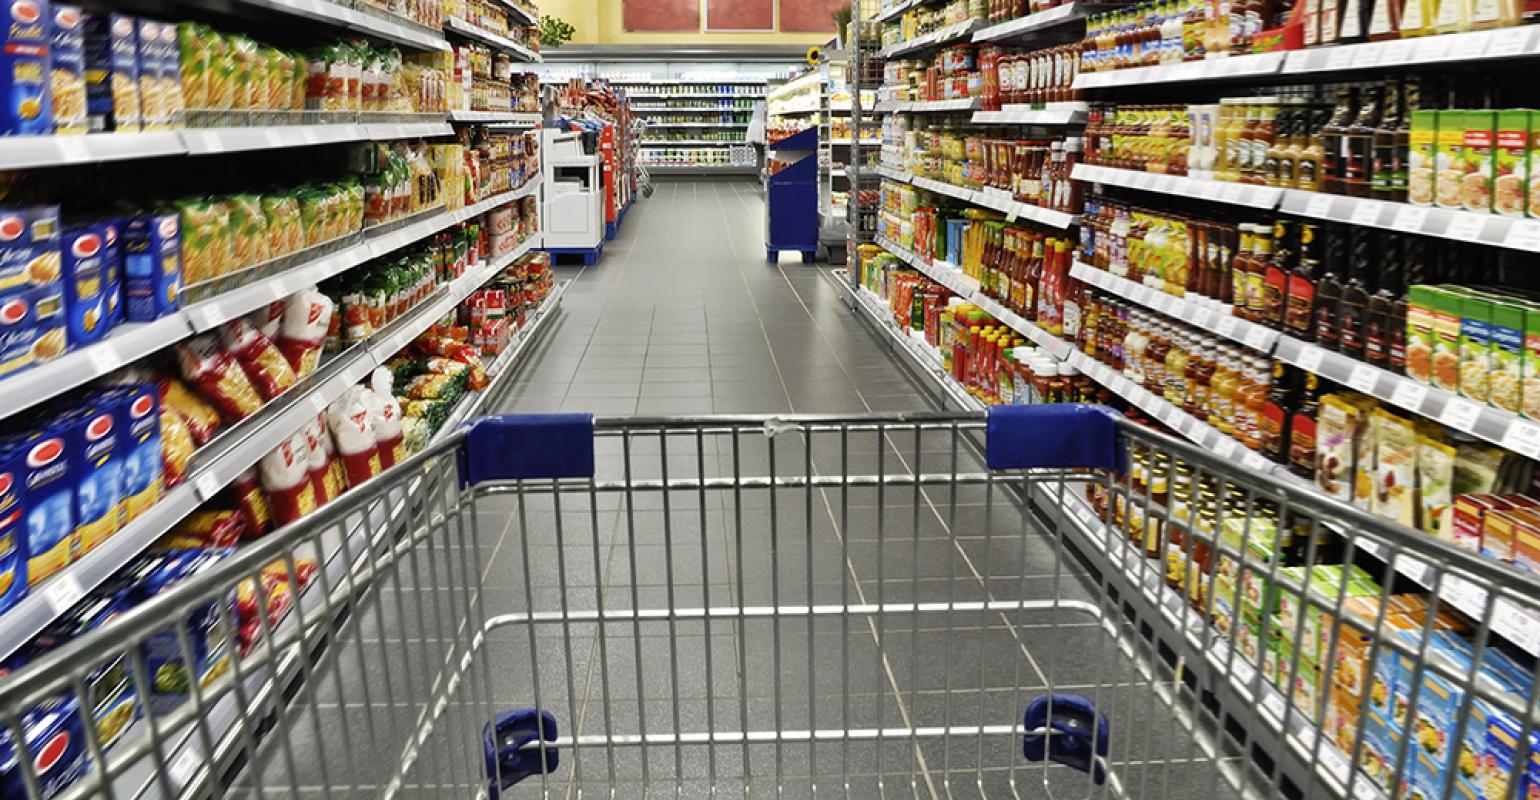 Busy consumers open to new ways of grocery shopping | Supermarket News